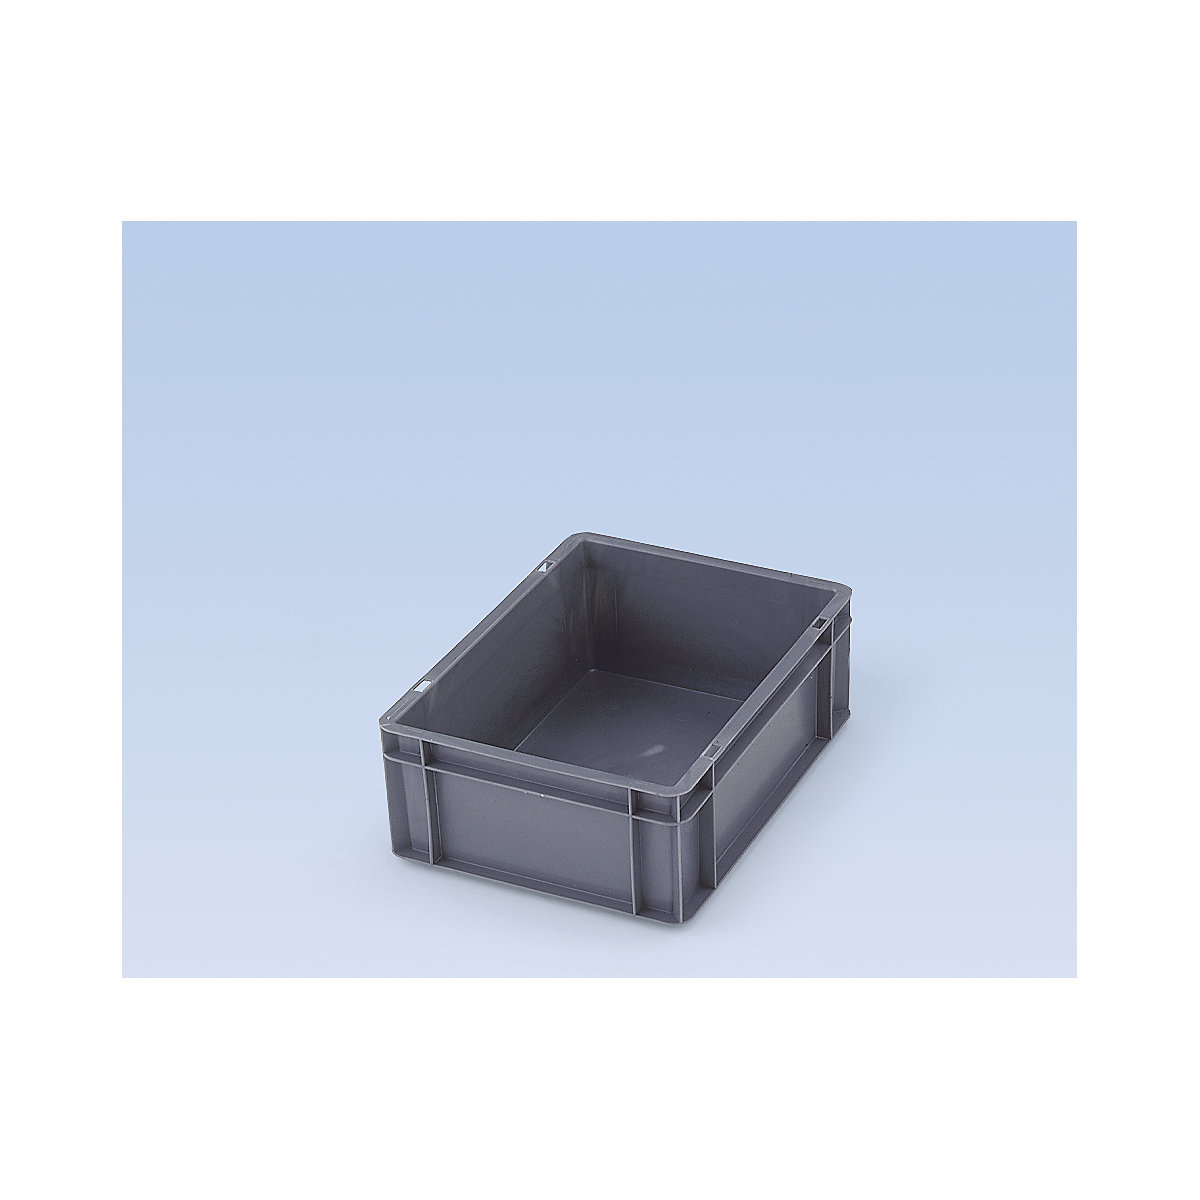 Euro stacking container, closed walls and base, LxWxH 400 x 300 x 50 mm, grey, pack of 5-4